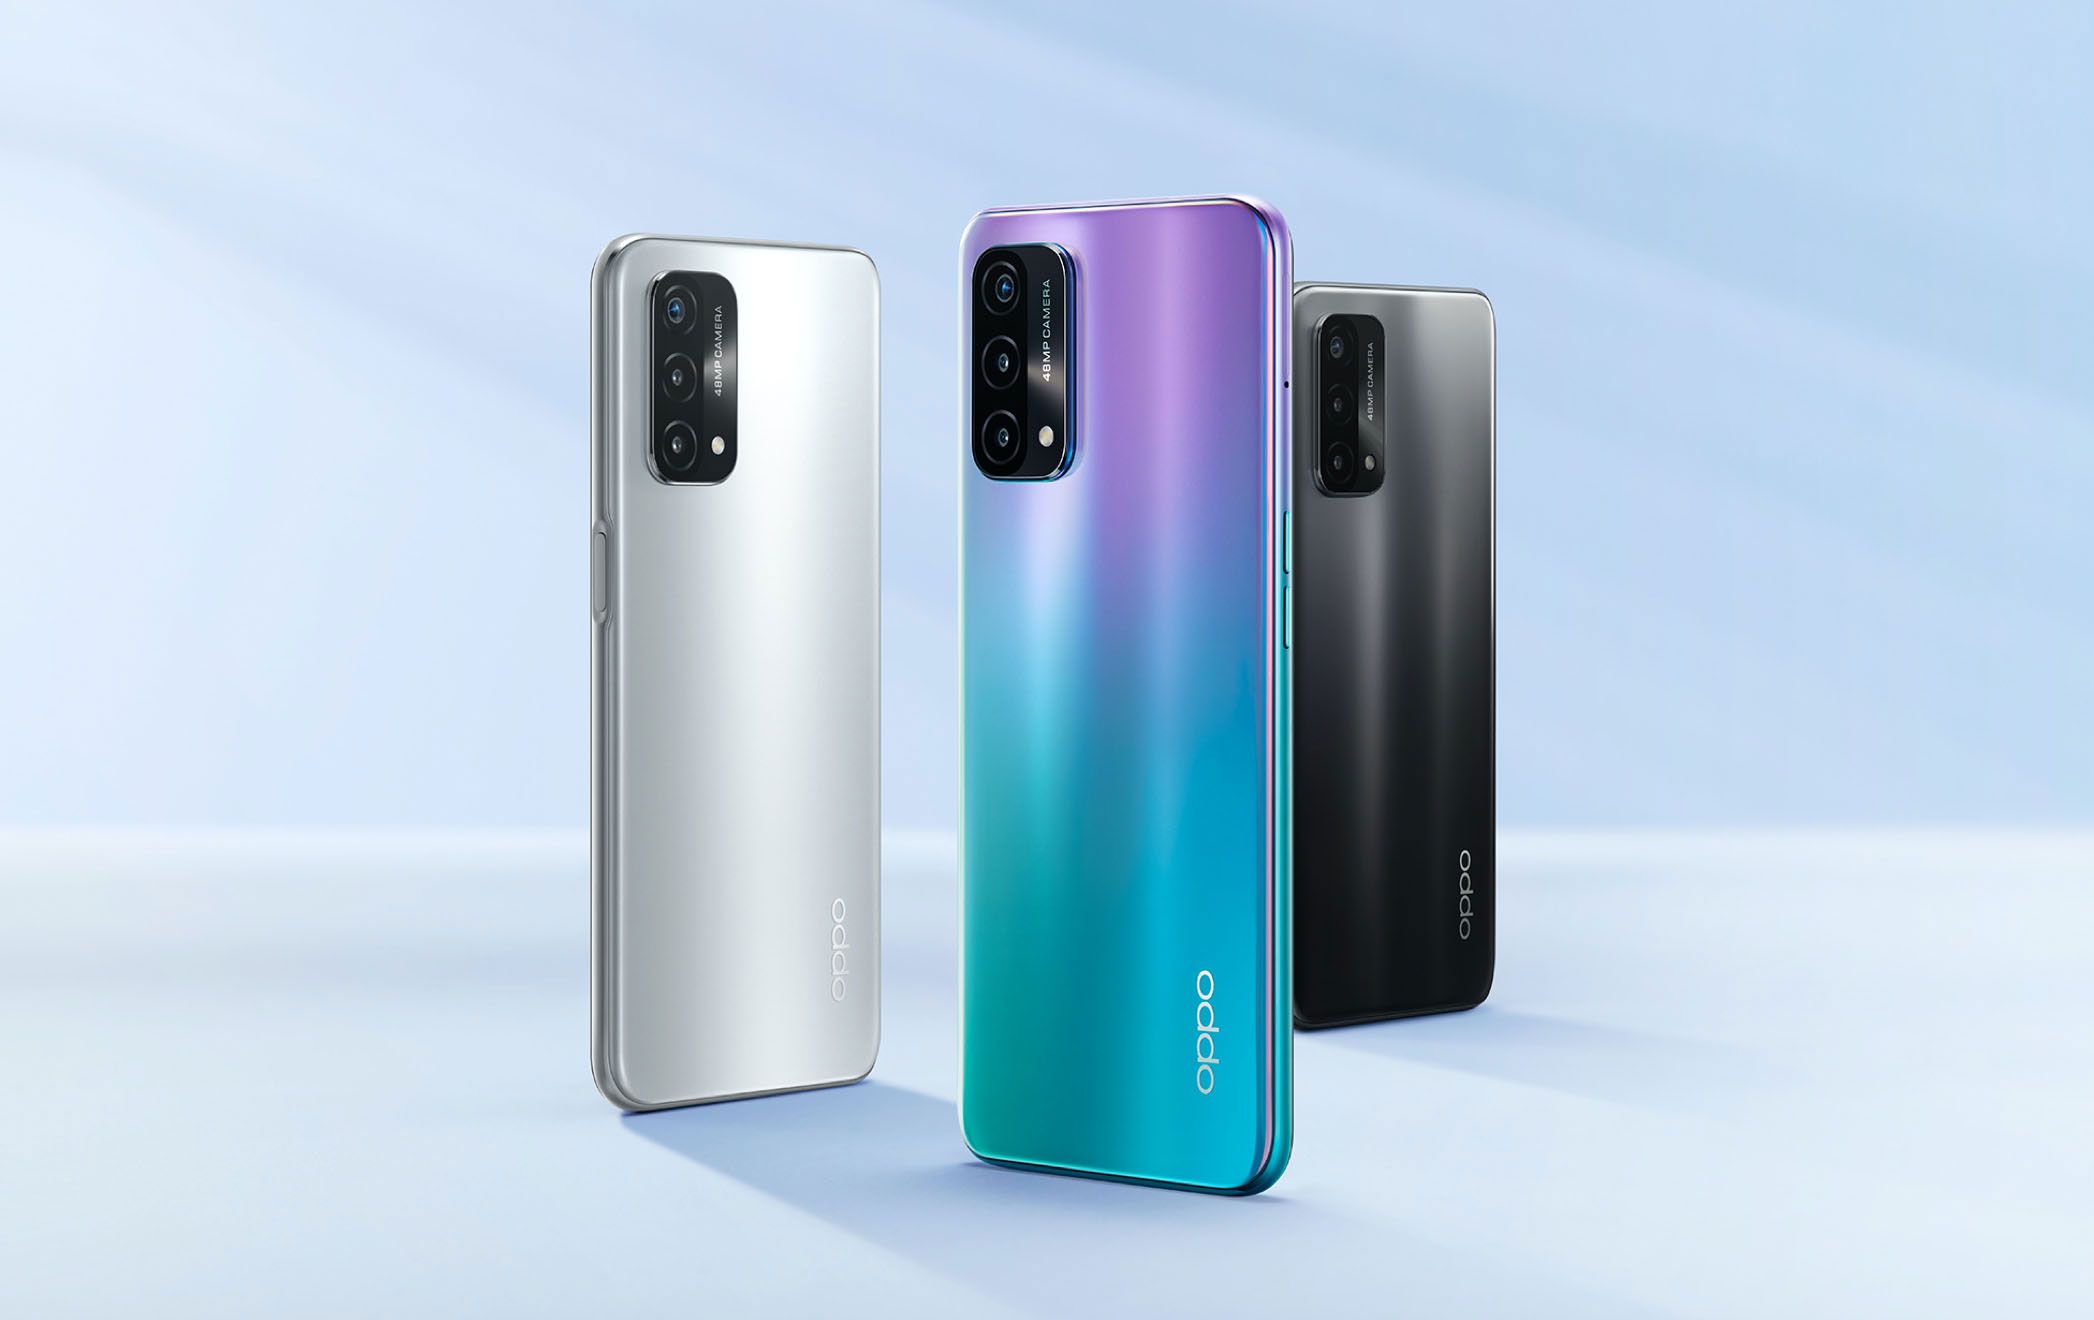 OPPO A93 5G with 90Hz display, Snapdragon 480, 48MP triple cameras launched in China